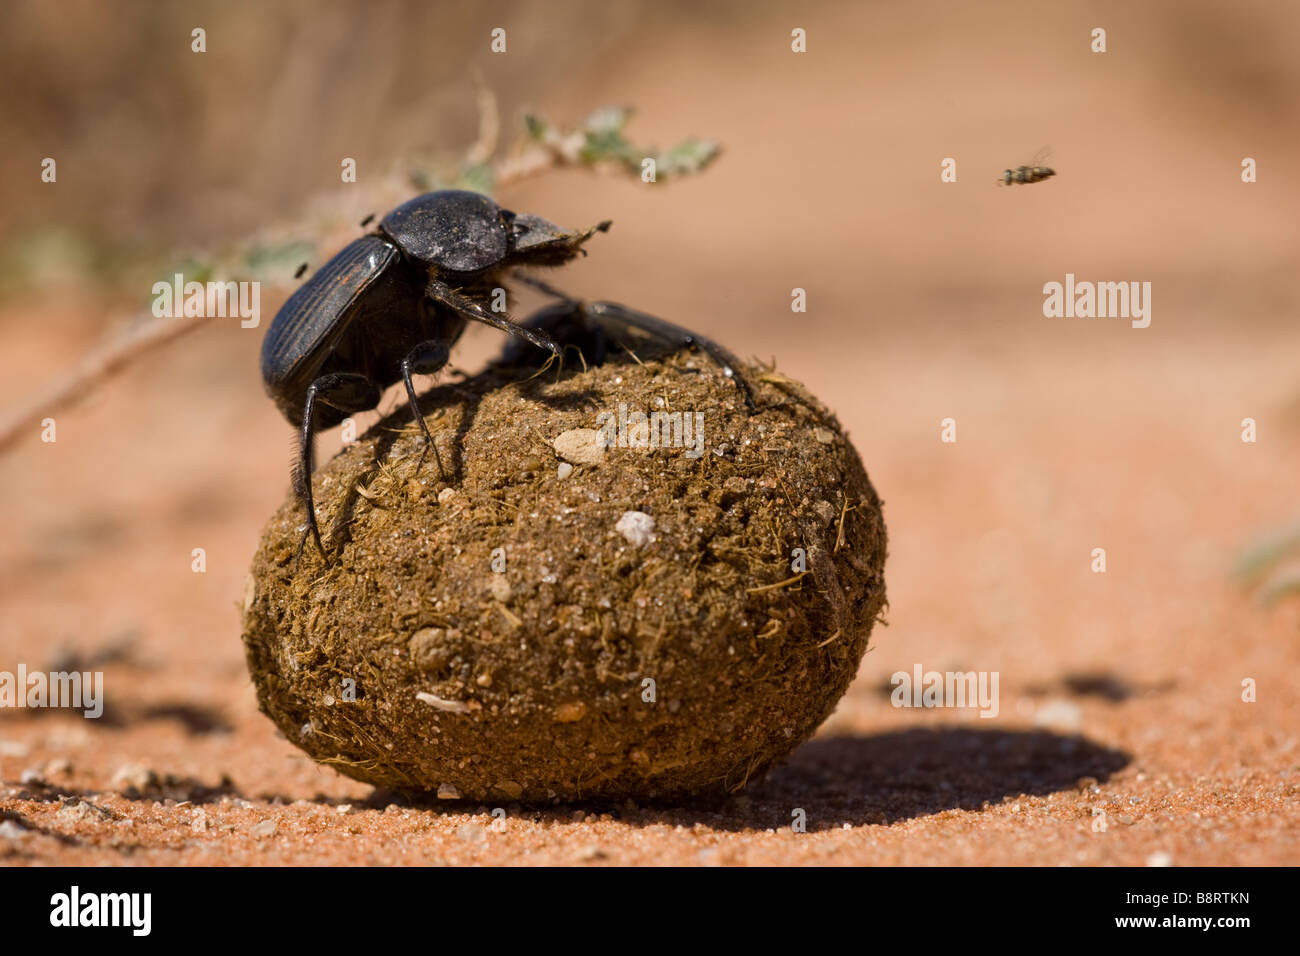 South Africa Kgalagadi Transfrontier Park Dung Beetle standing on top of rolling ball of fresh dung in Kalahari Desert Stock Photo